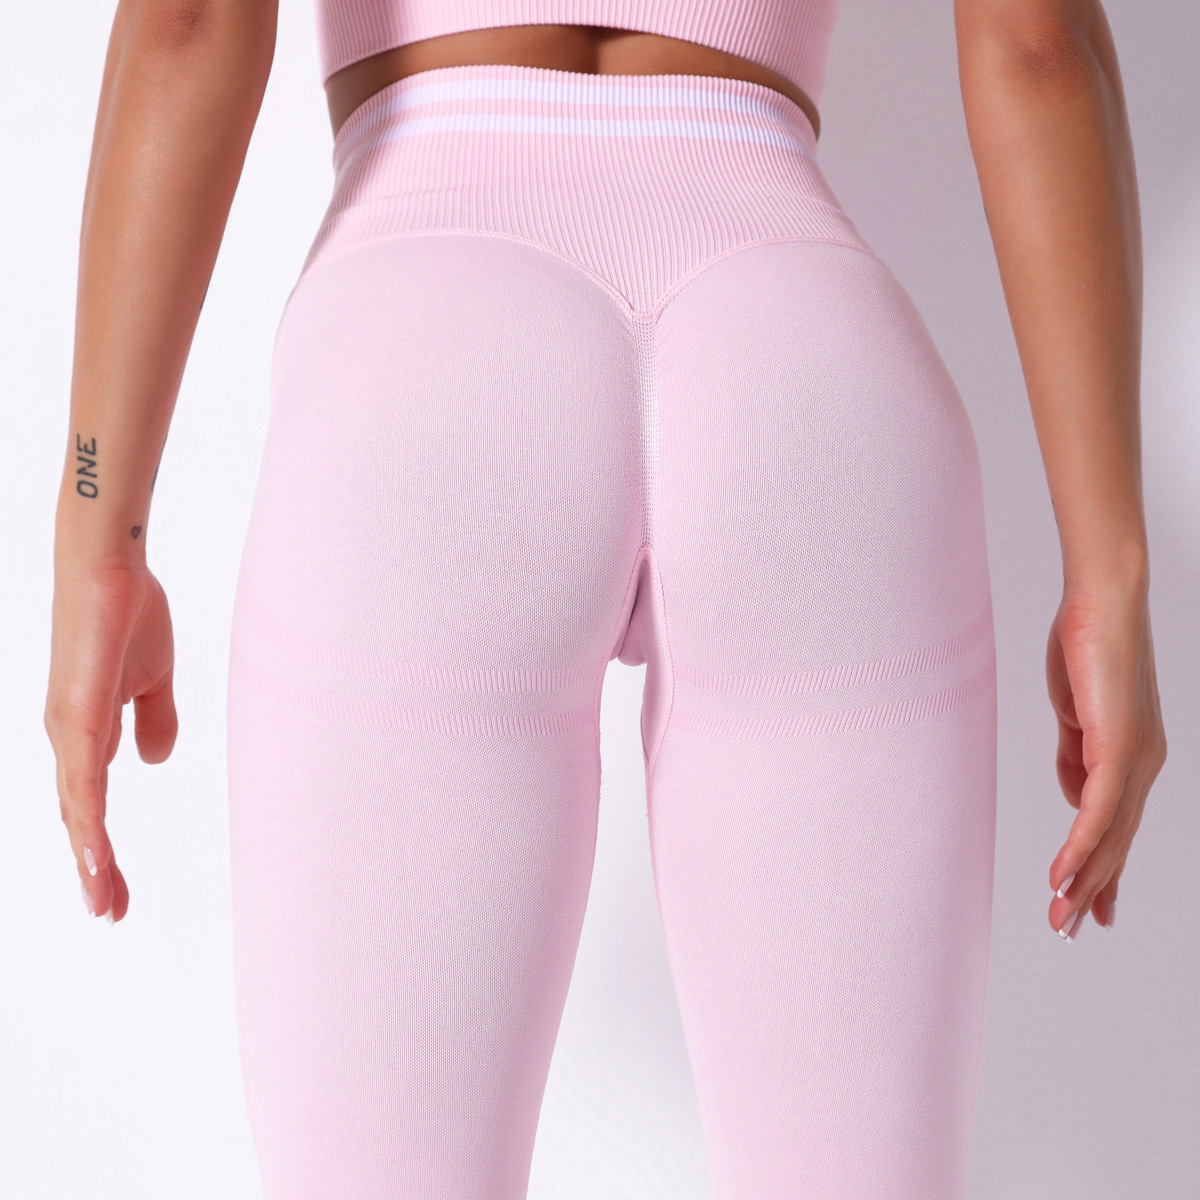 Hip-Lifting High-Waisted Elastic Tight-Fitting Bodybuilding Sports Pants NSNS10725